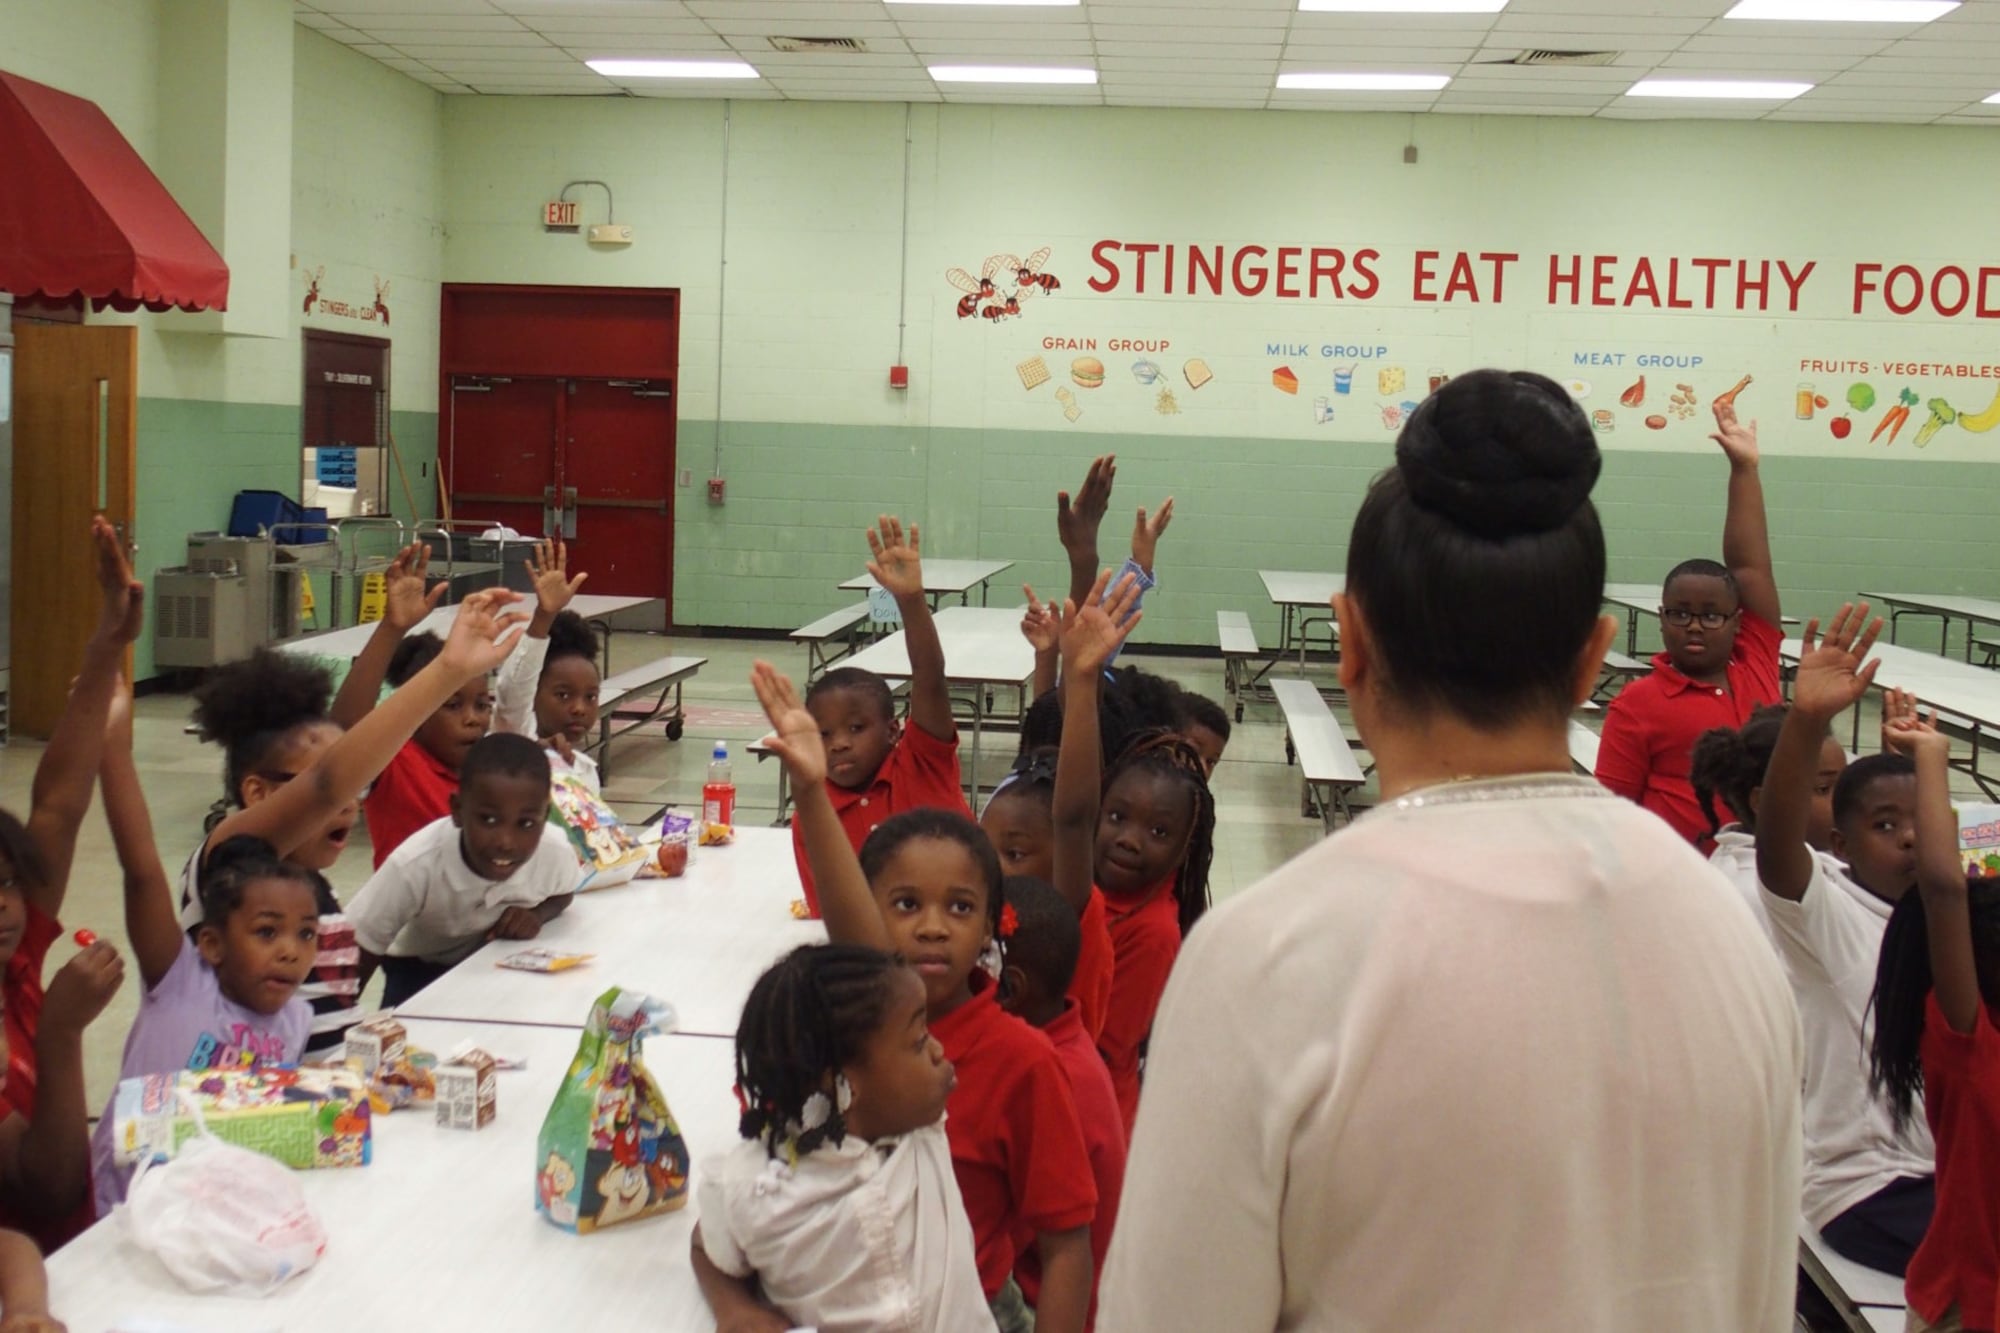 Students sitting around a school cafeteria table raise their hands when their principal asks a question